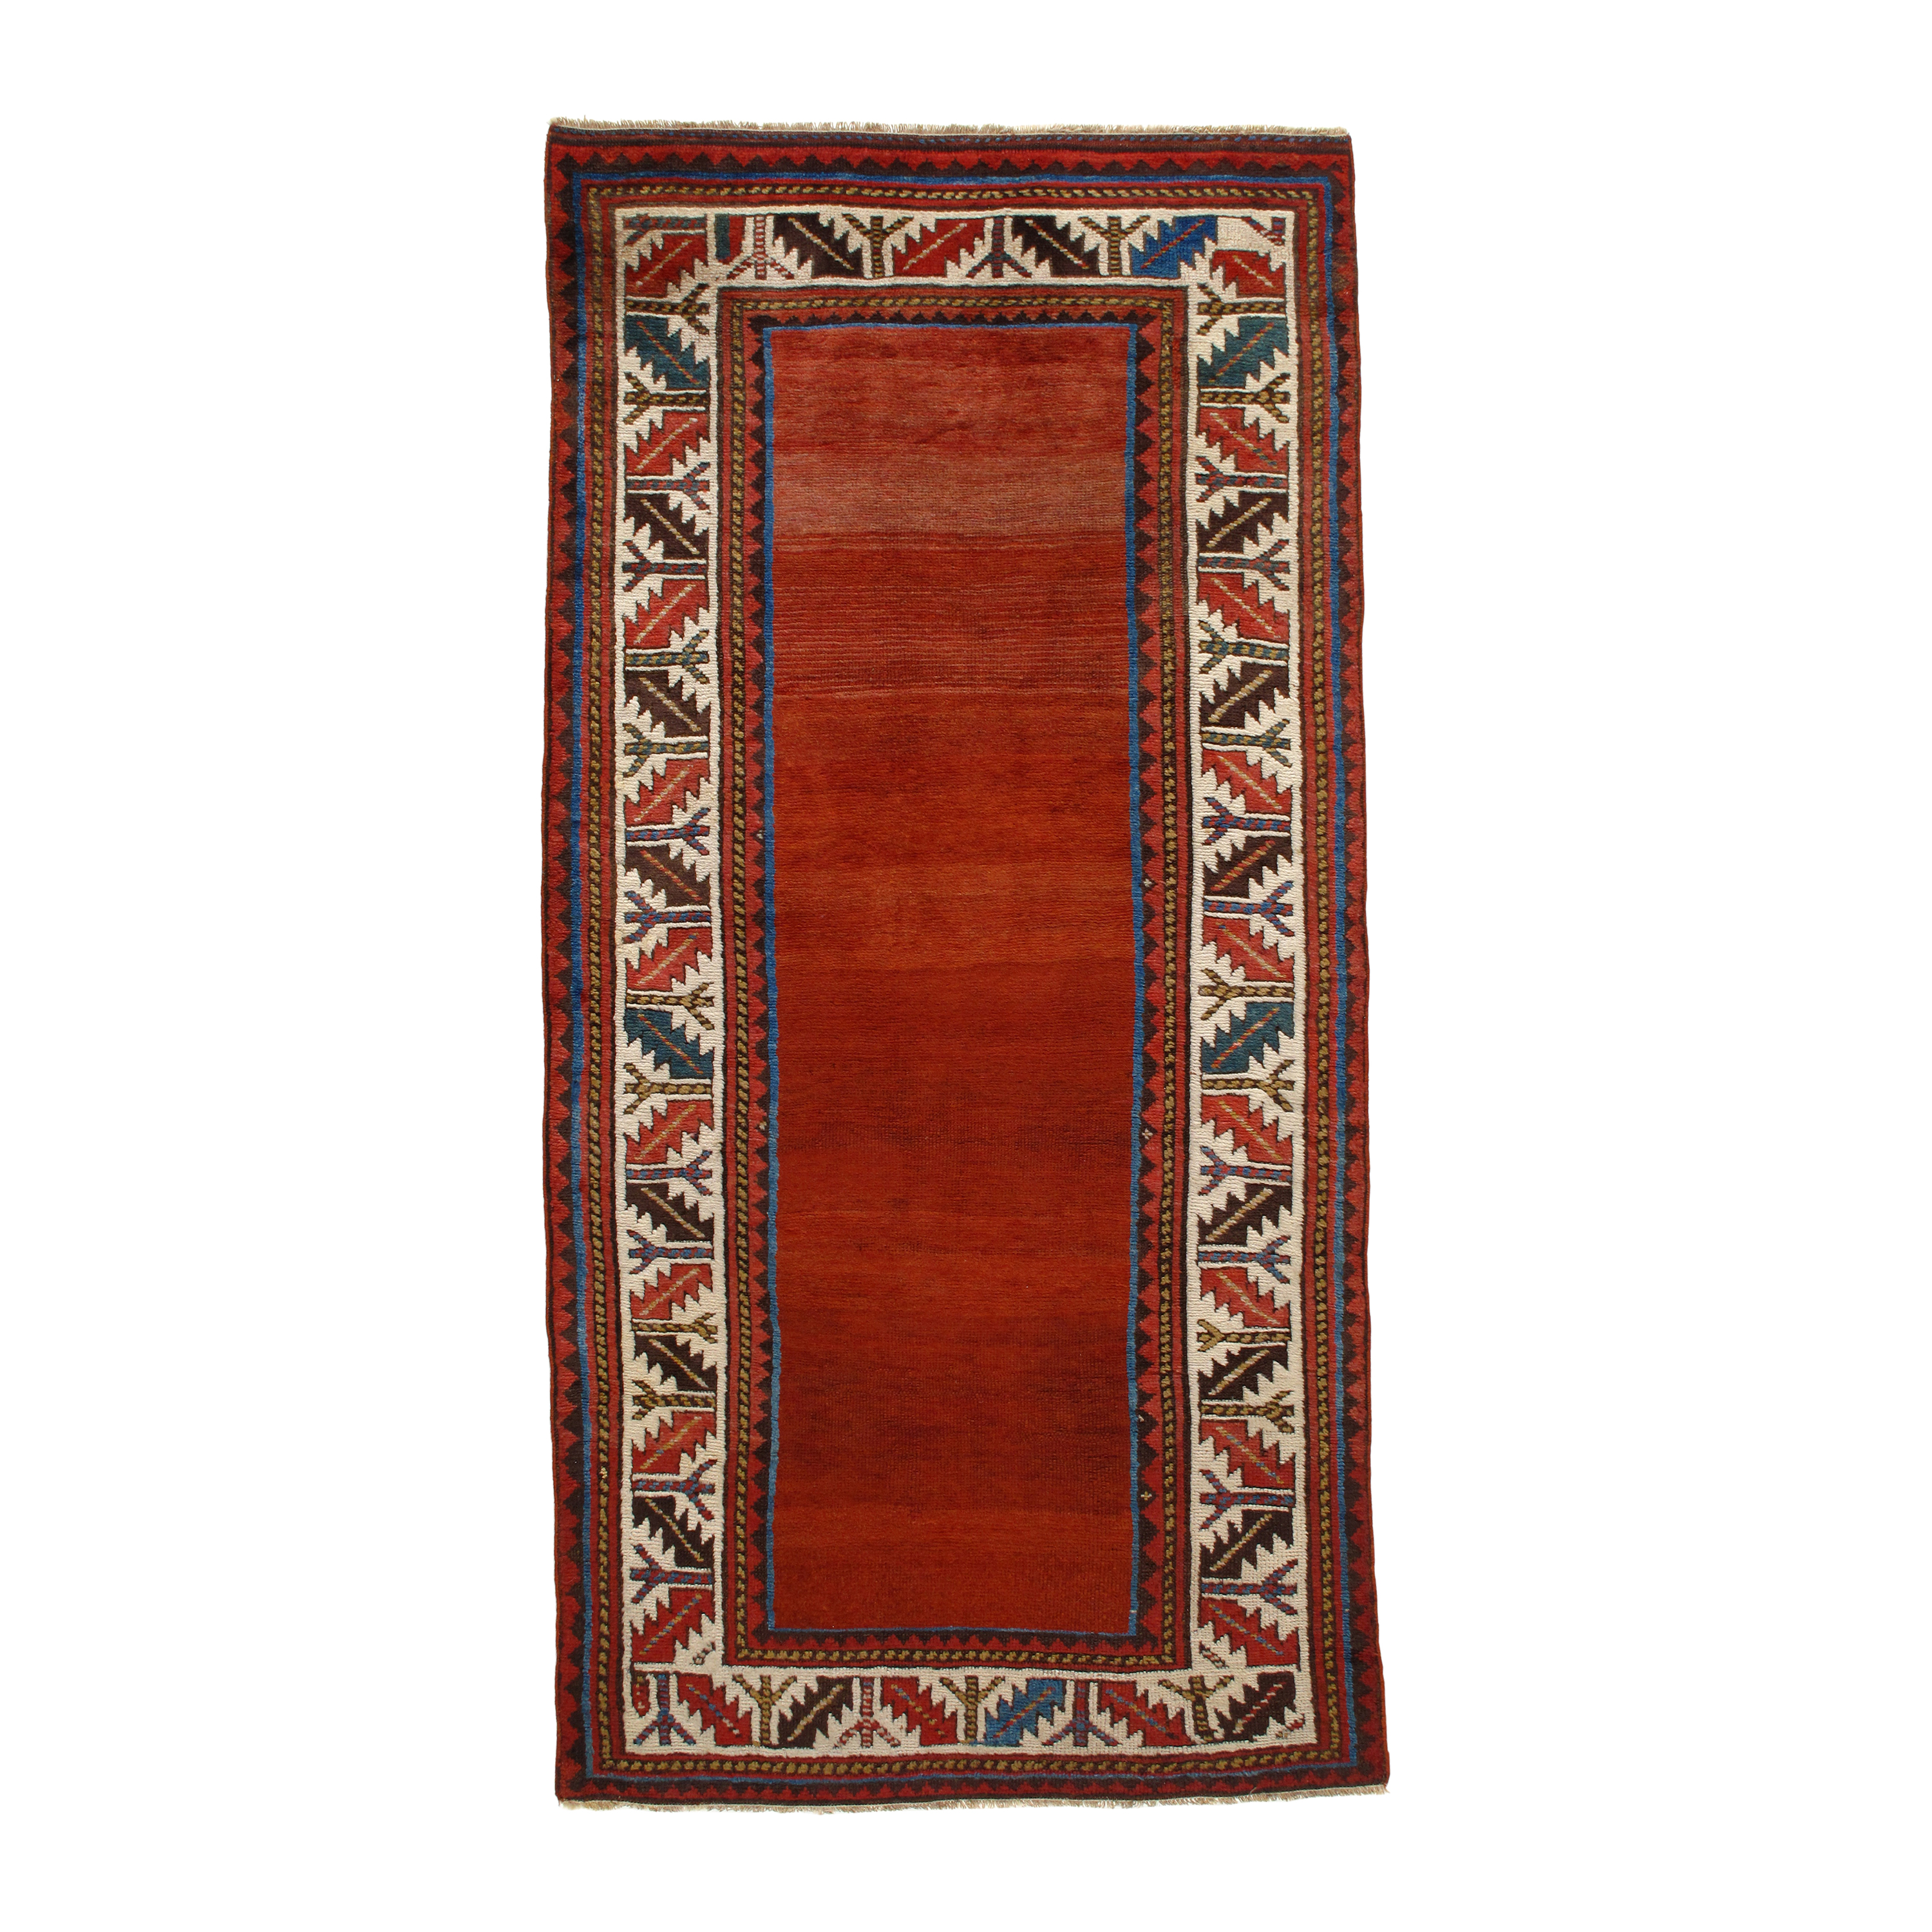 This Kurdish rug  is crafted using hand-carded Persian wool and natural dyes.